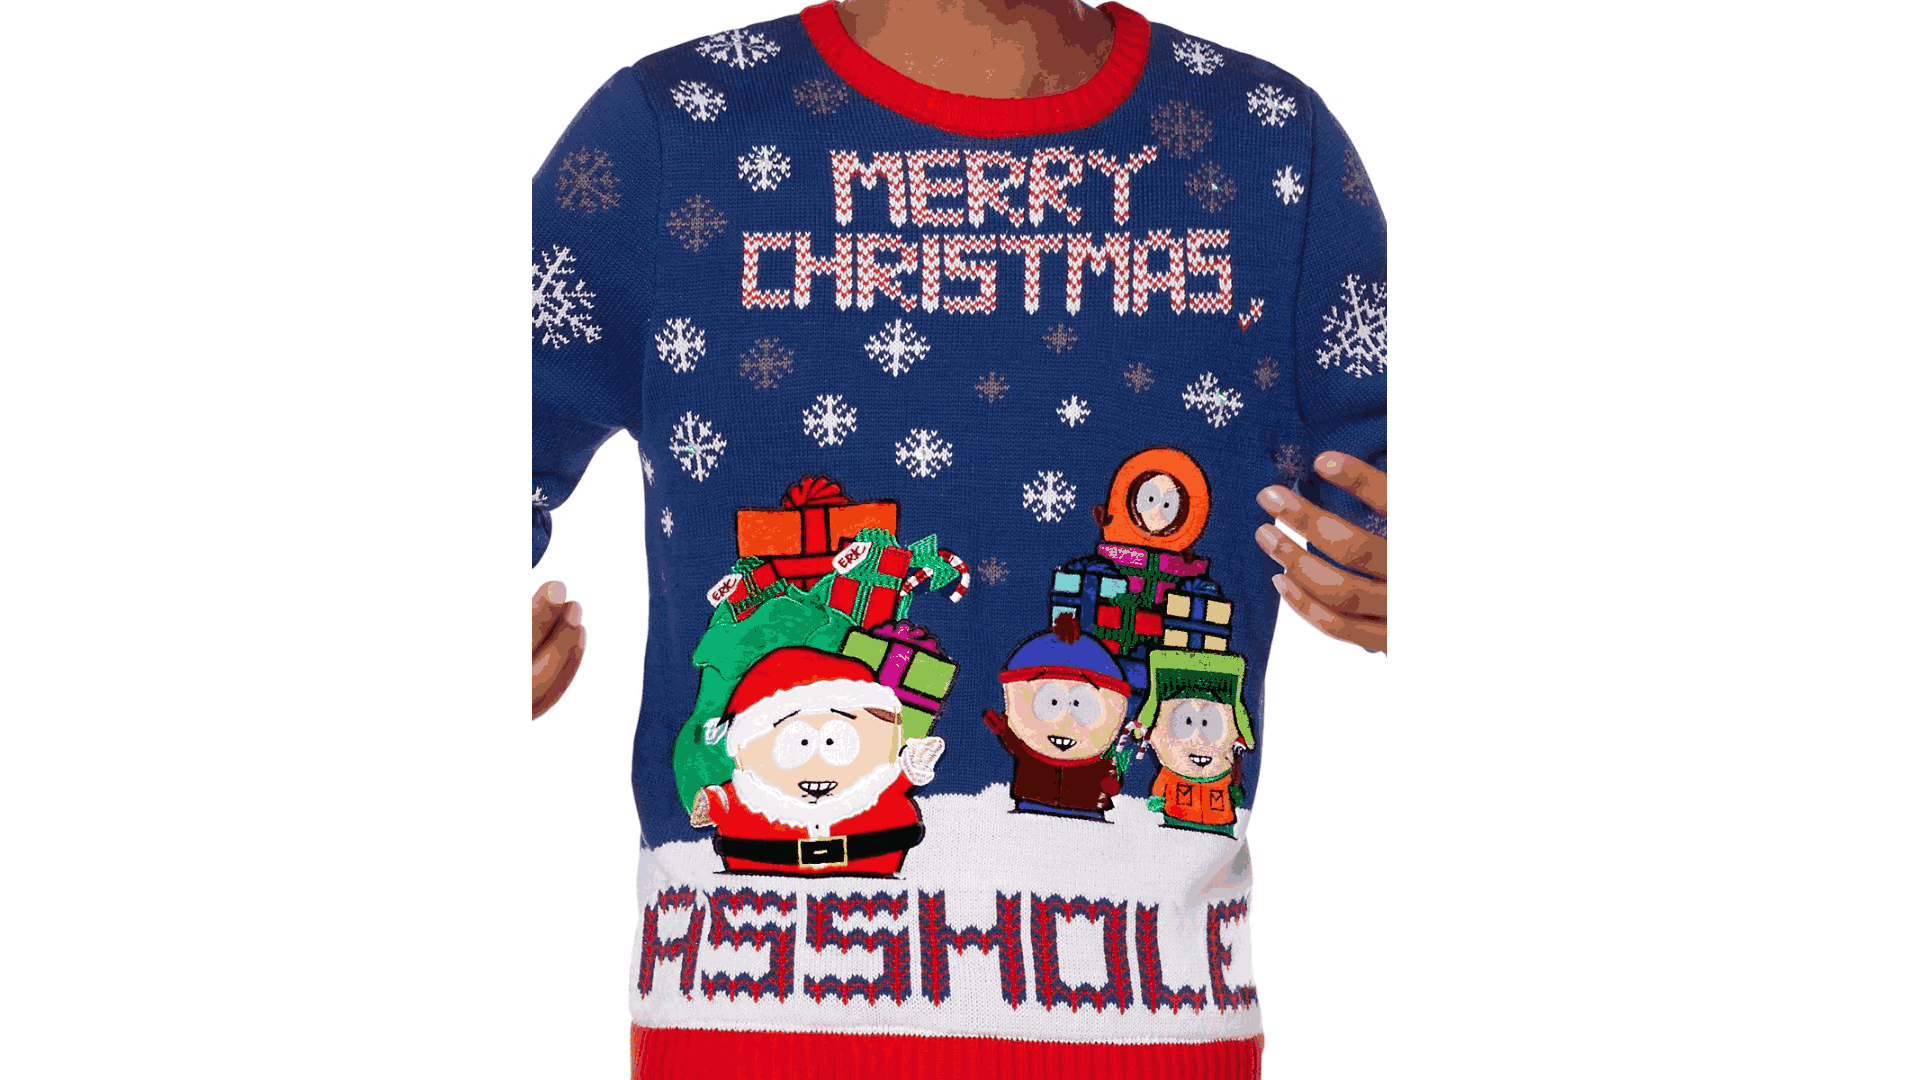 Merry Christmas Asshole Ugly Christmas Sweater South Park